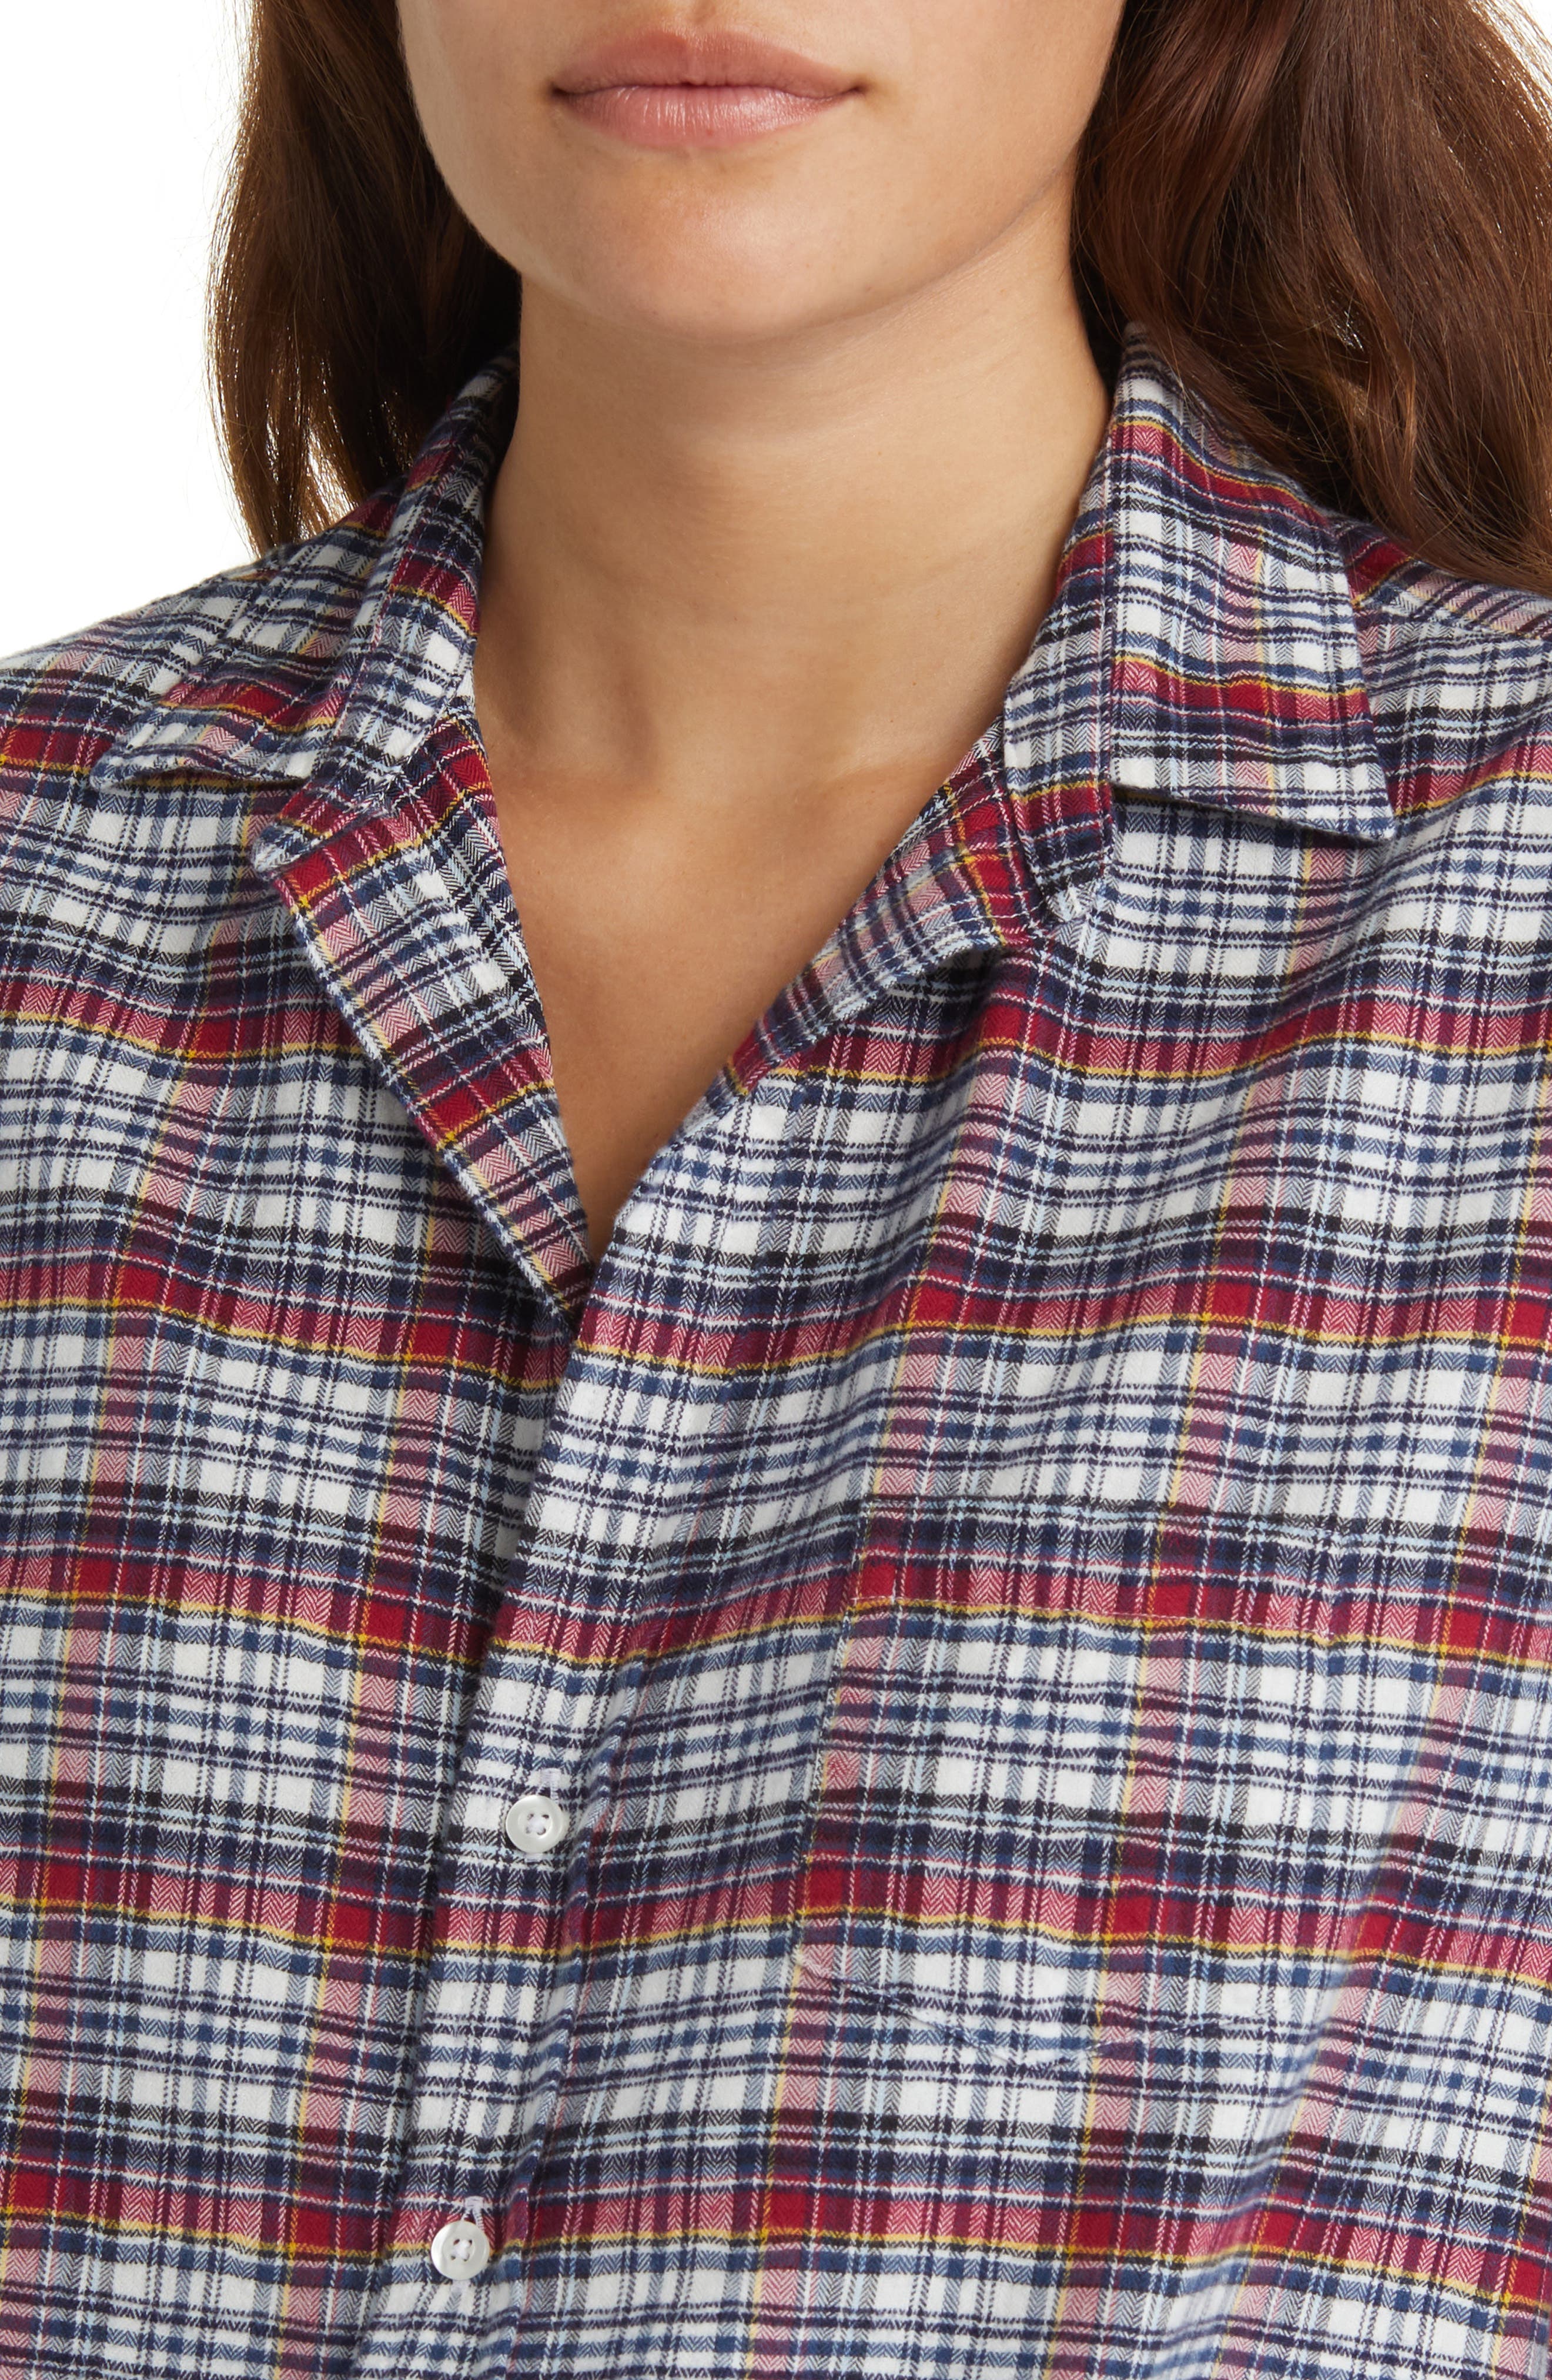 Frank & Eileen Eileen Plaid Relaxed Button-Up Shirt in Wine Navy Plaid